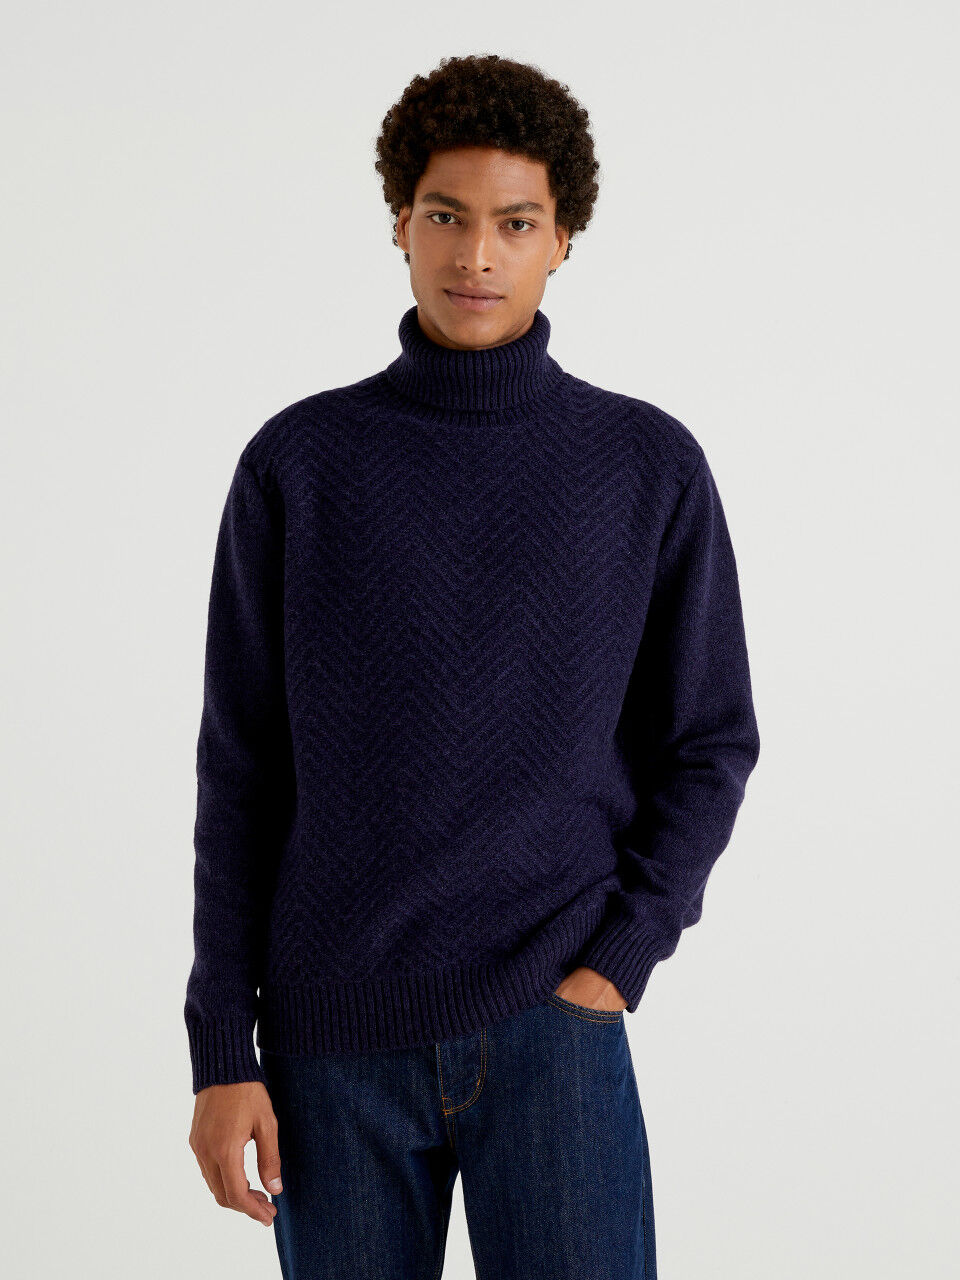 Men's Knitwear and Jumpers New Collection 2022 | Benetton